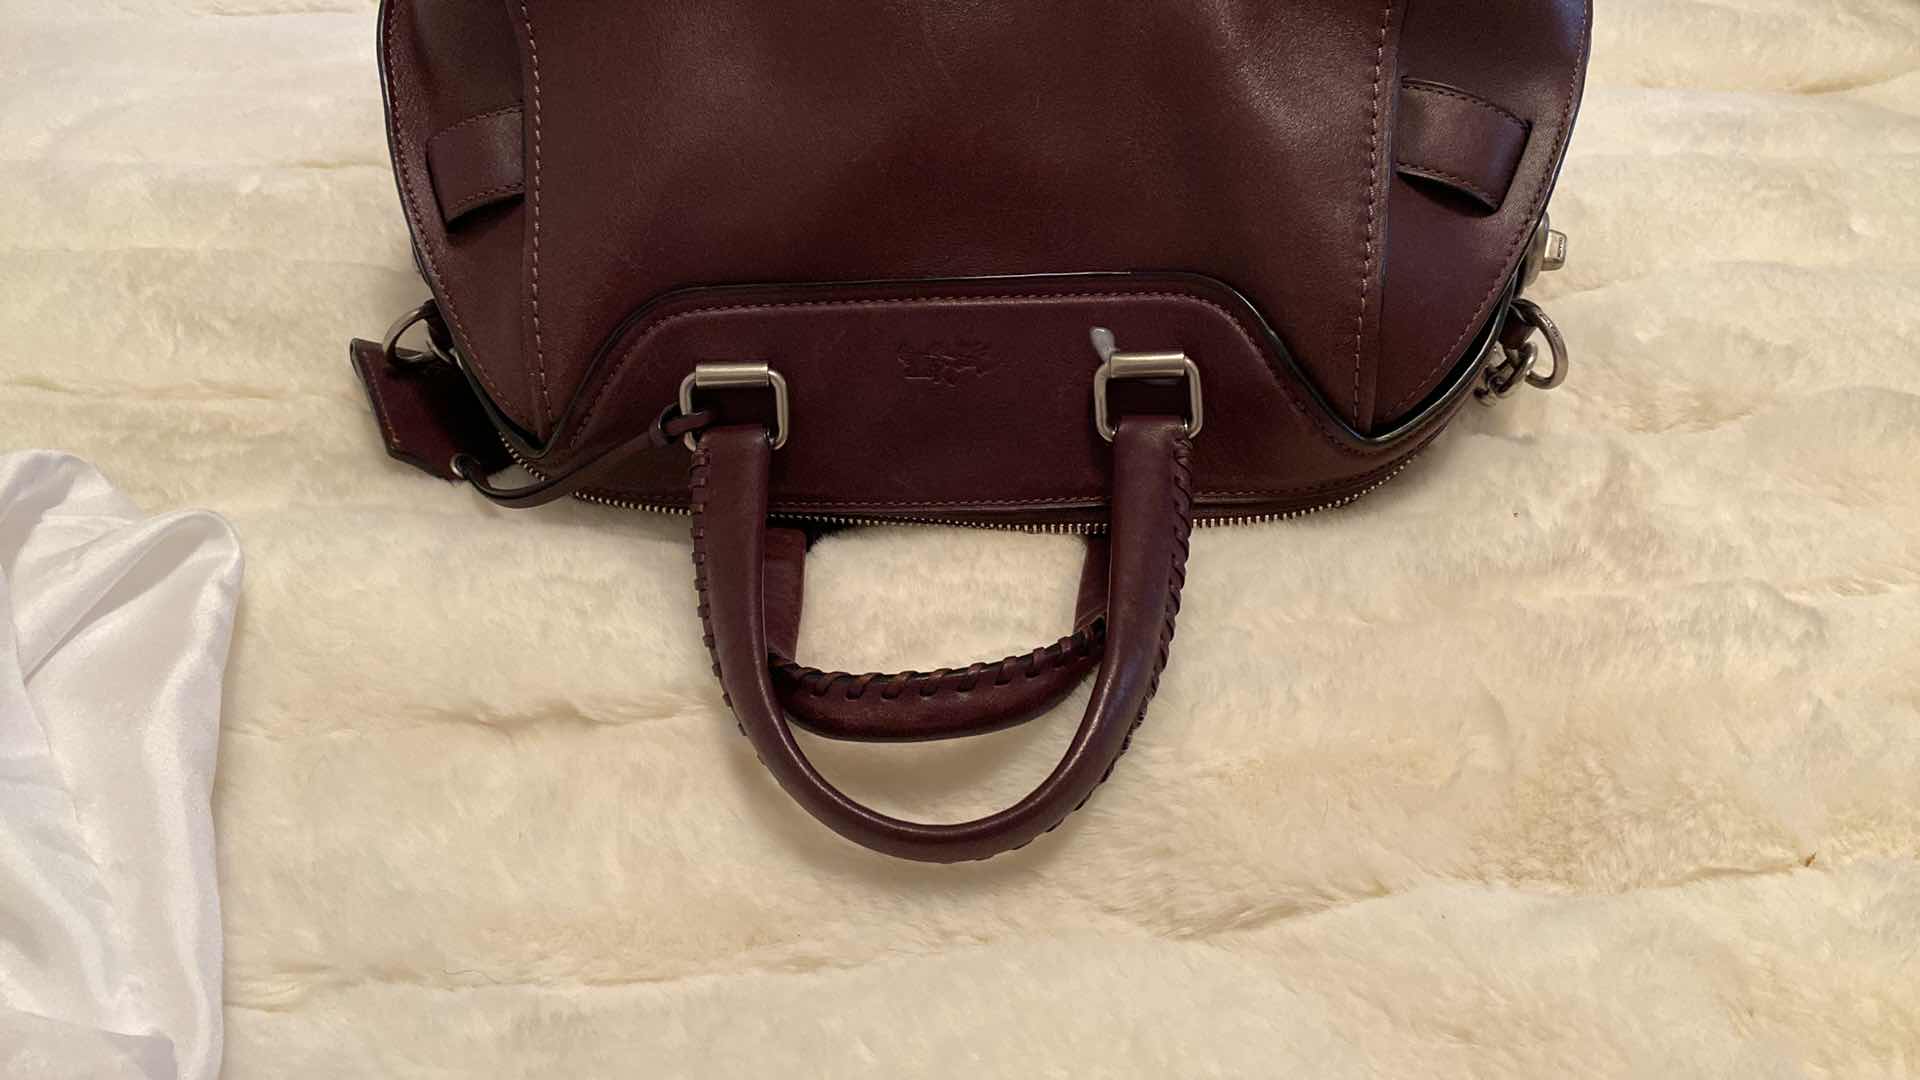 Photo 11 of $869 AUTHENTIC COACH ACE SATCHEL IN BURGUNDY WITH STRAP, WHIPSTITCHED HANDLES AND GUNMETAL HARDWARE INCLUDES DUSTBAG- NON RETURABLE - FINAL SALE